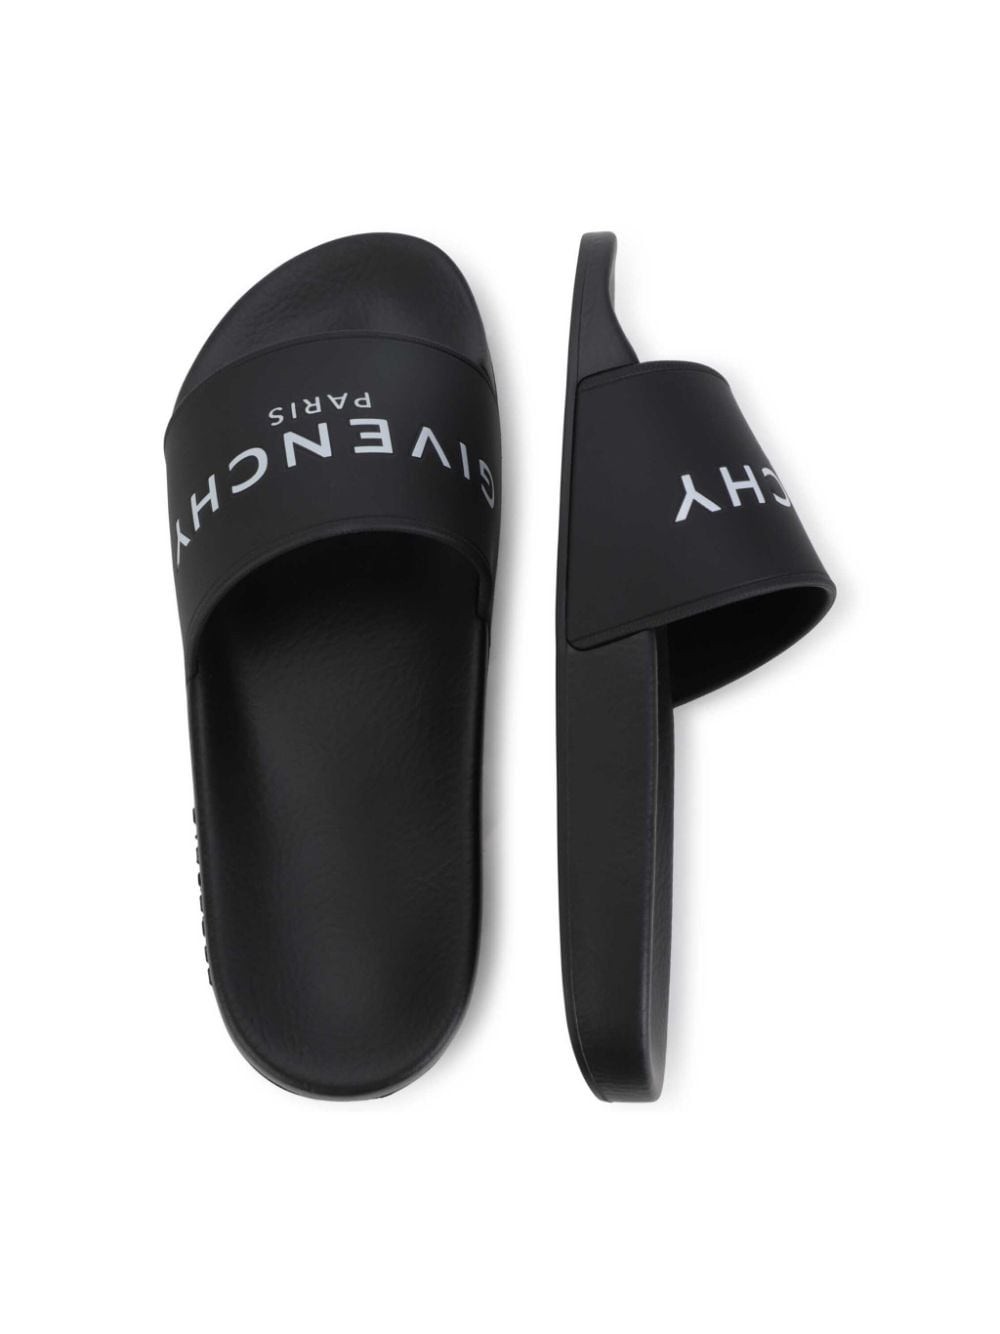 Slippers with logo